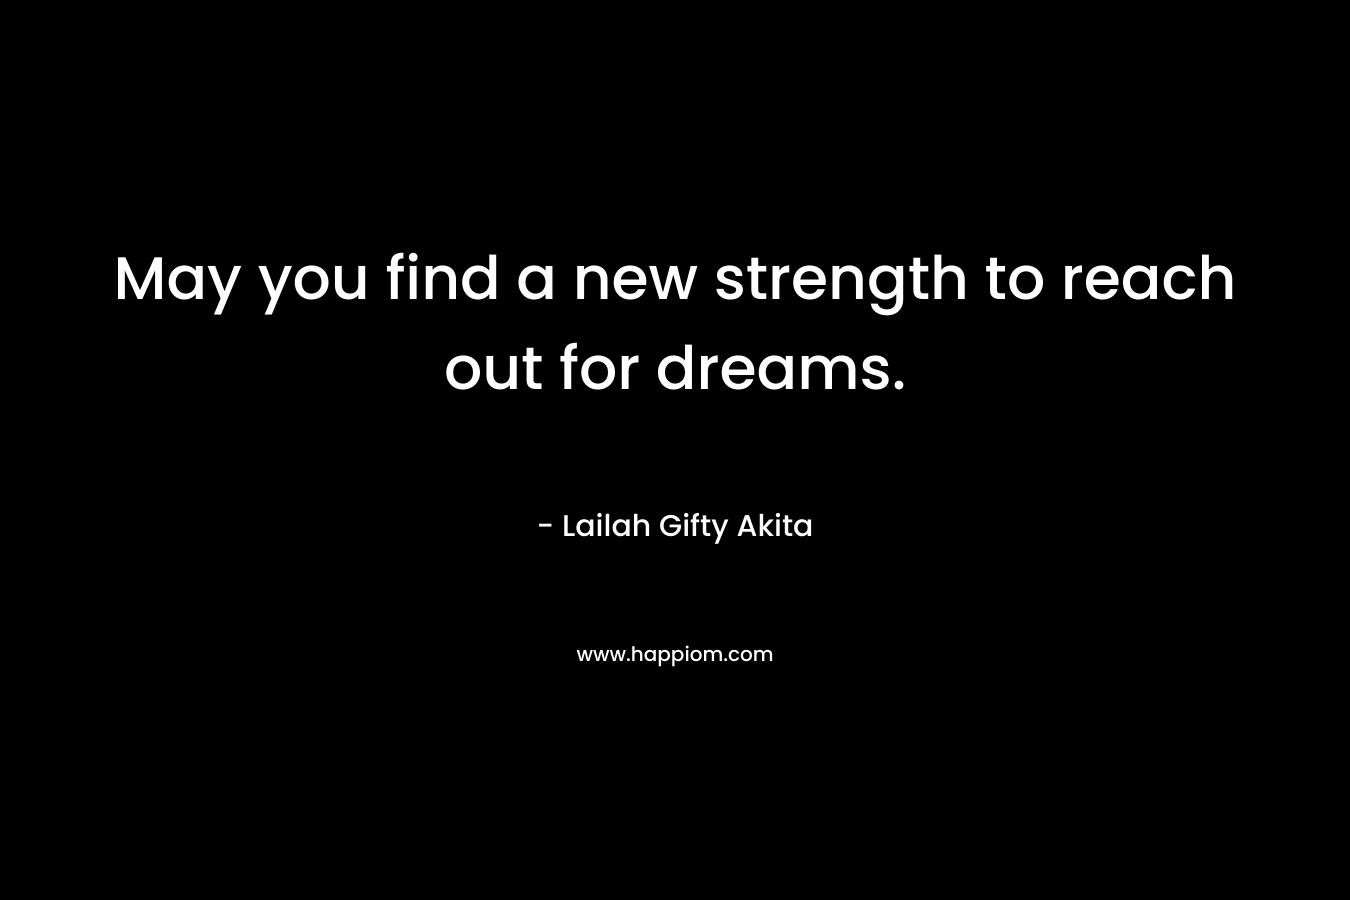 May you find a new strength to reach out for dreams.